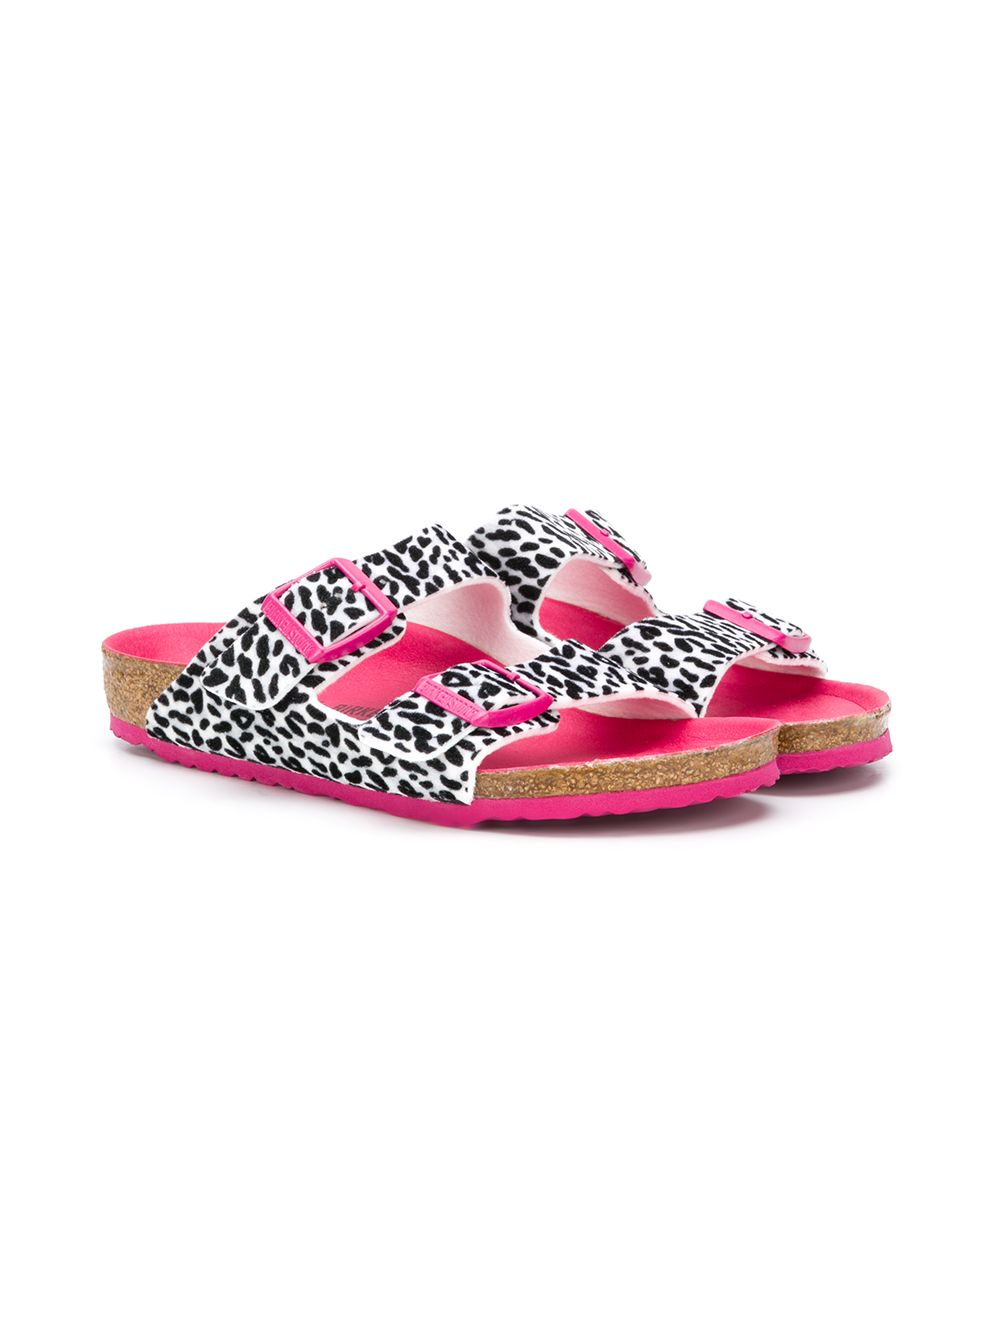 Lilly patterned sandals for kids 